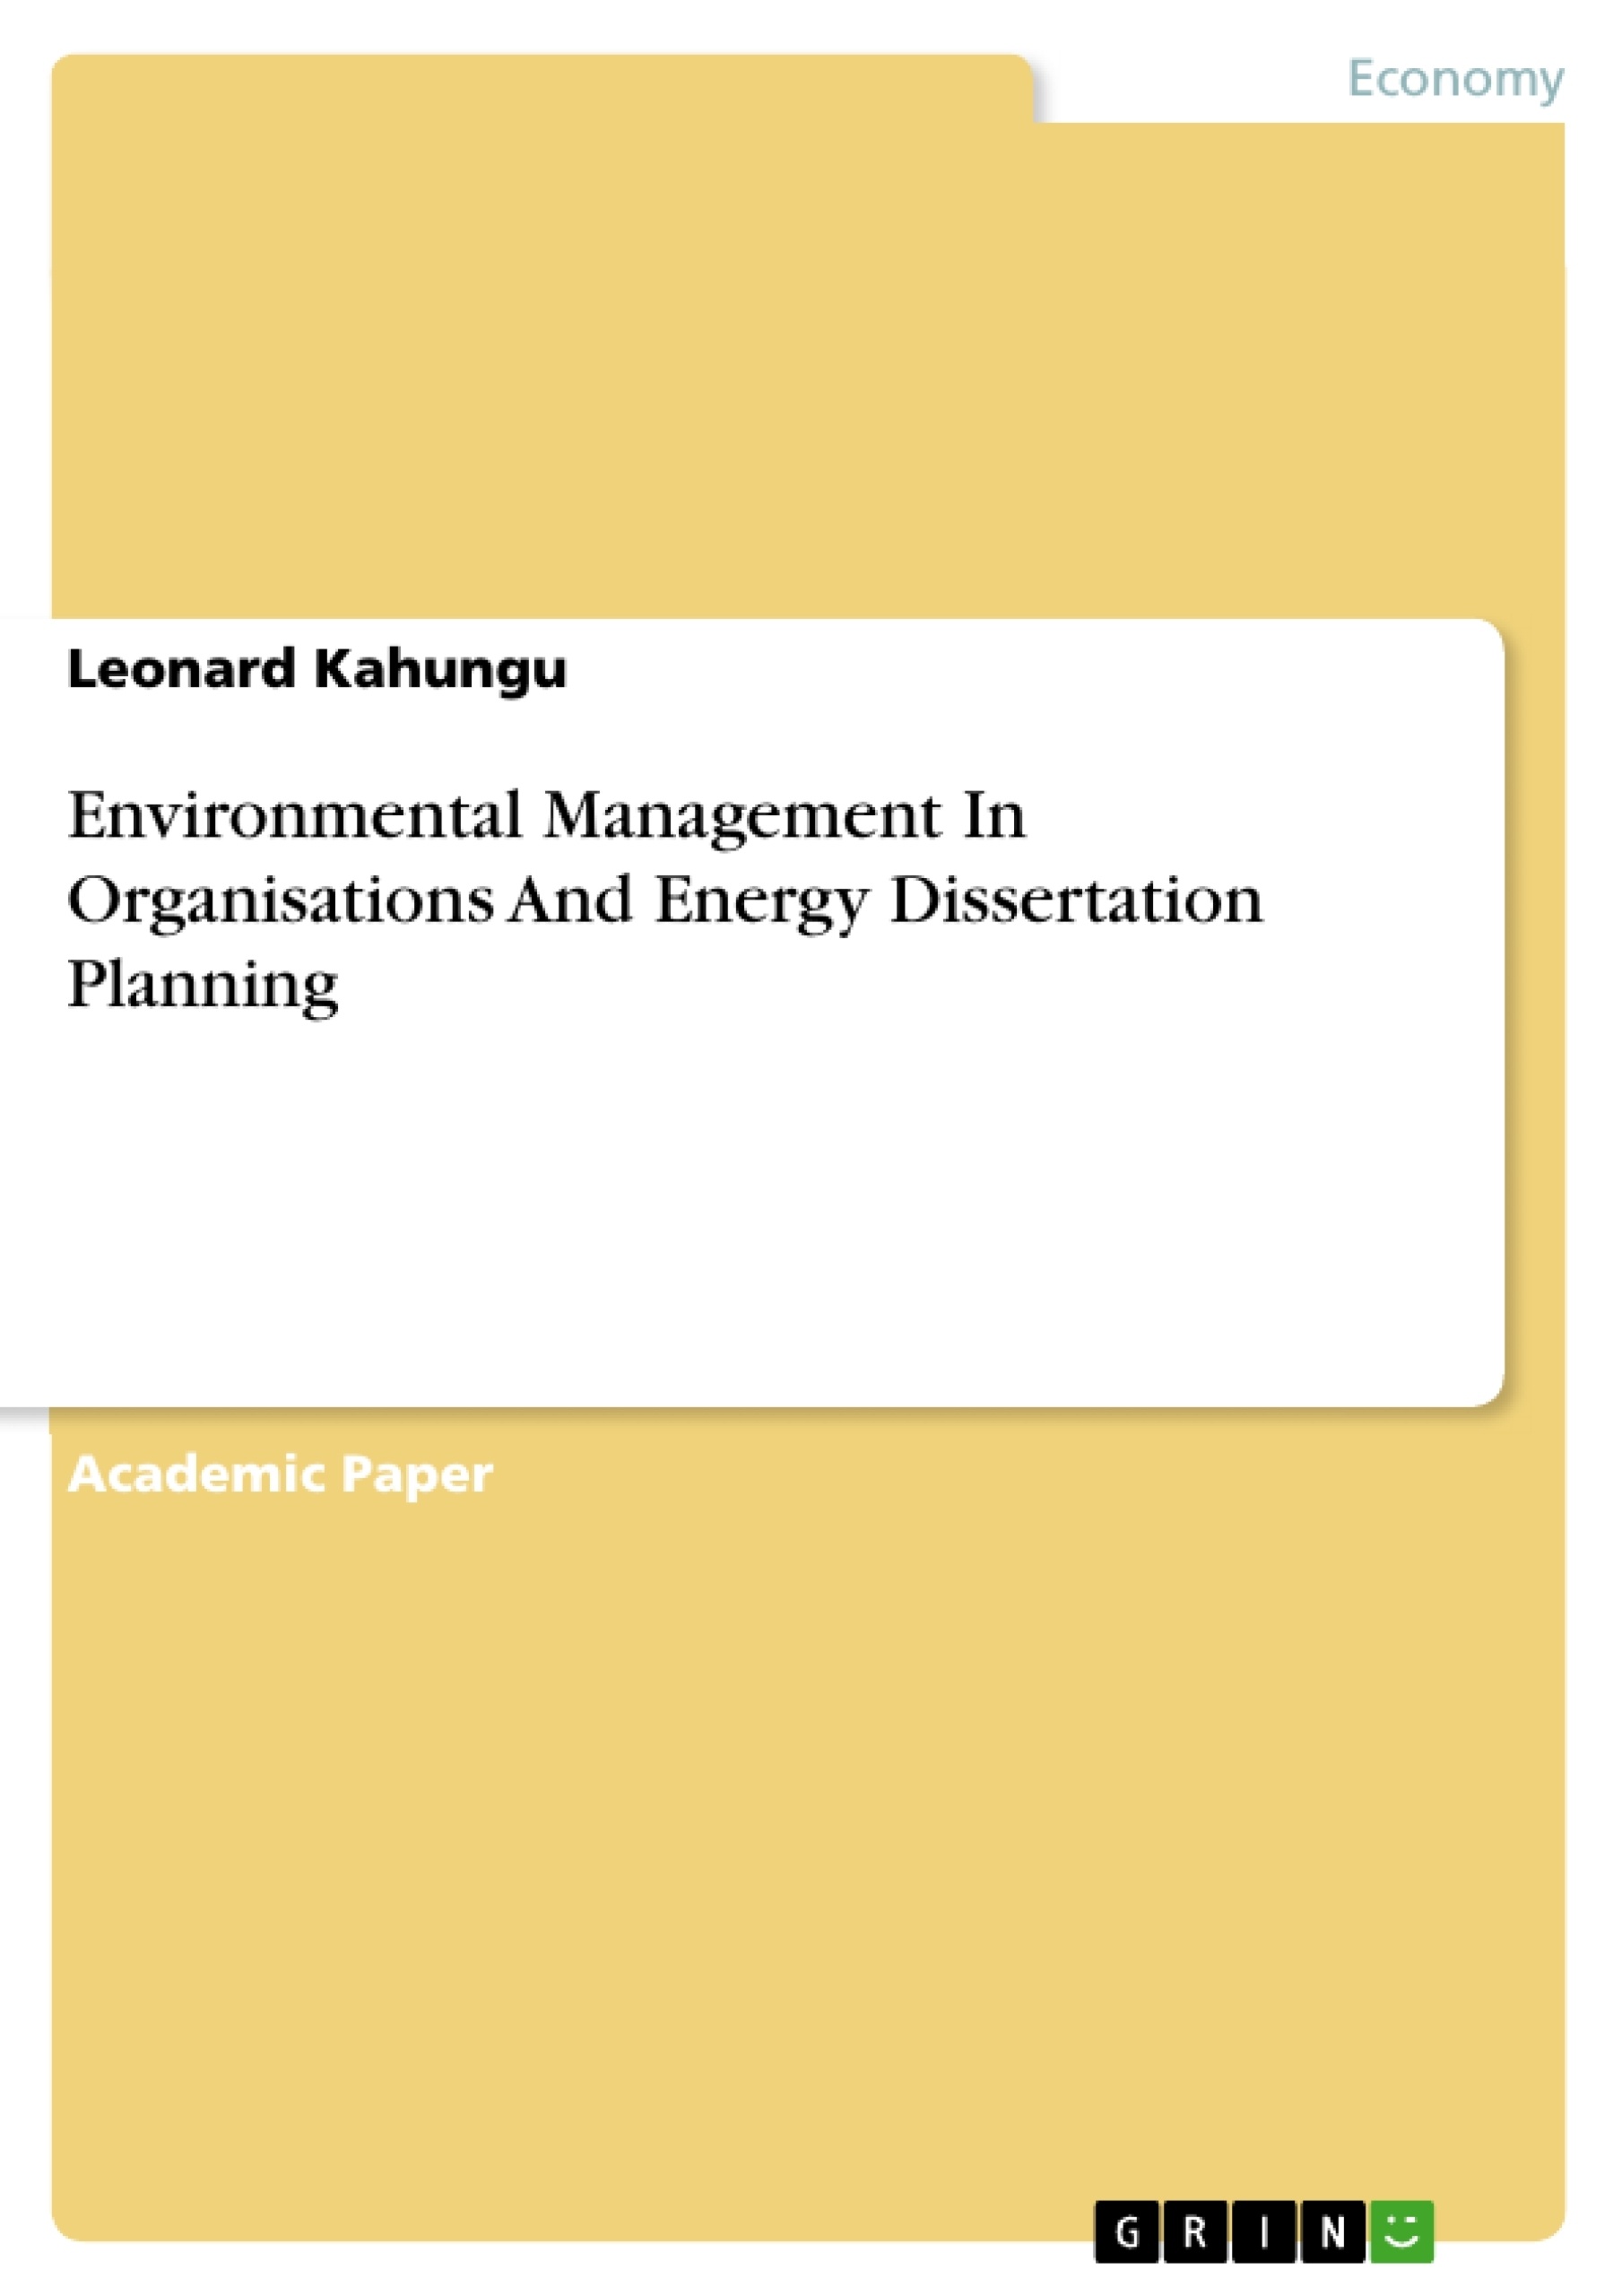 Título: Environmental Management In Organisations And Energy Dissertation Planning